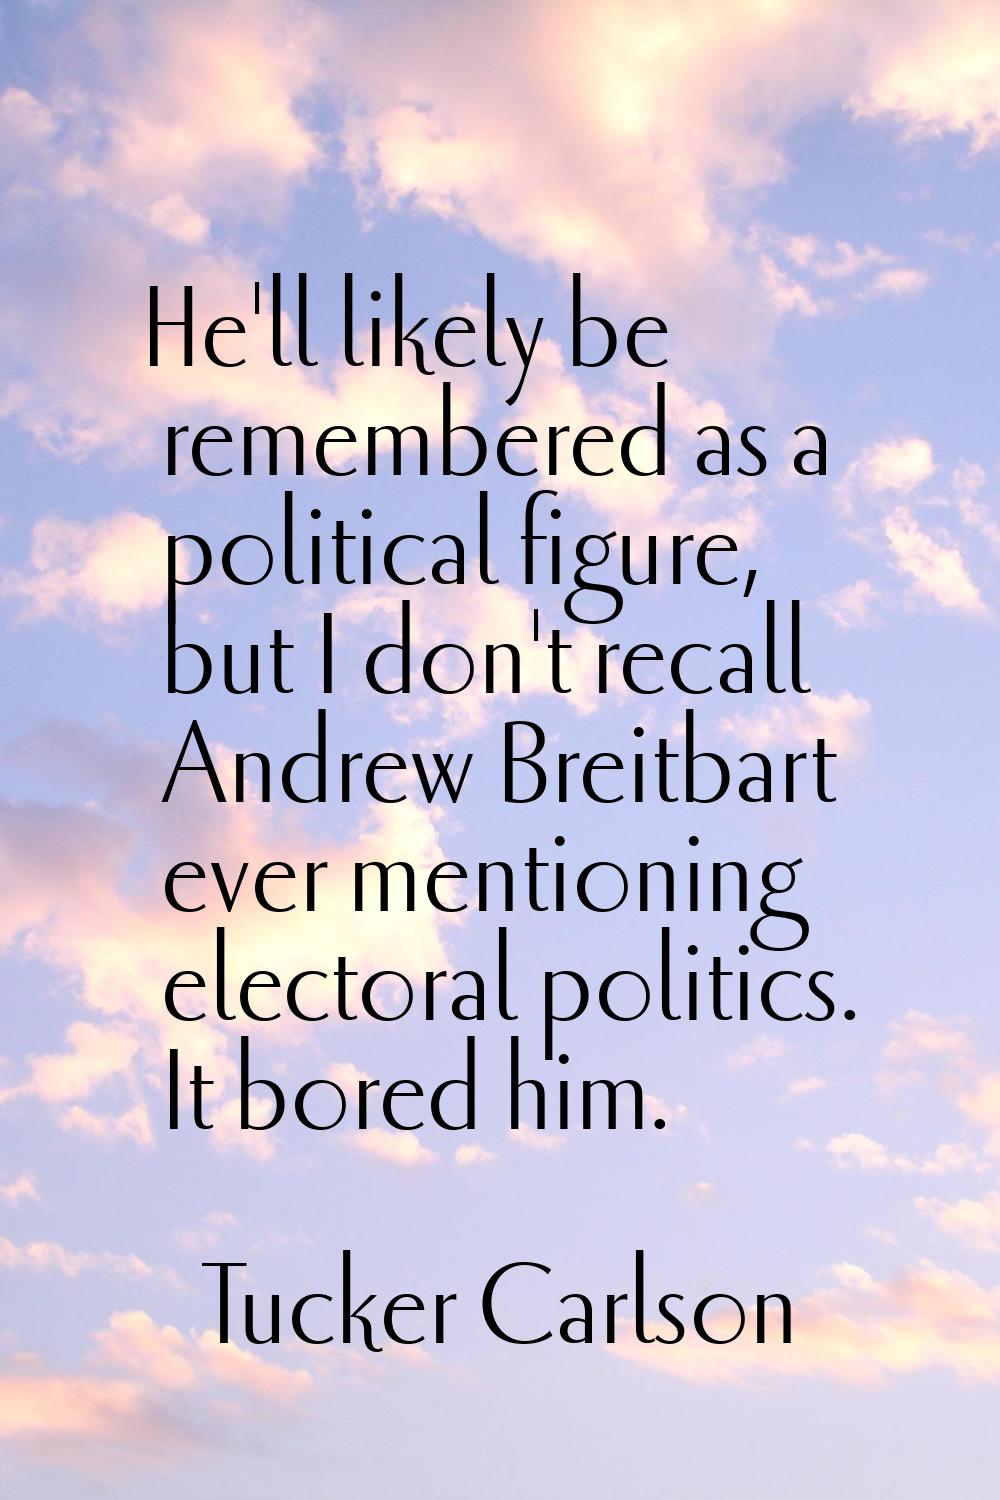 He'll likely be remembered as a political figure, but I don't recall Andrew Breitbart ever mentioni